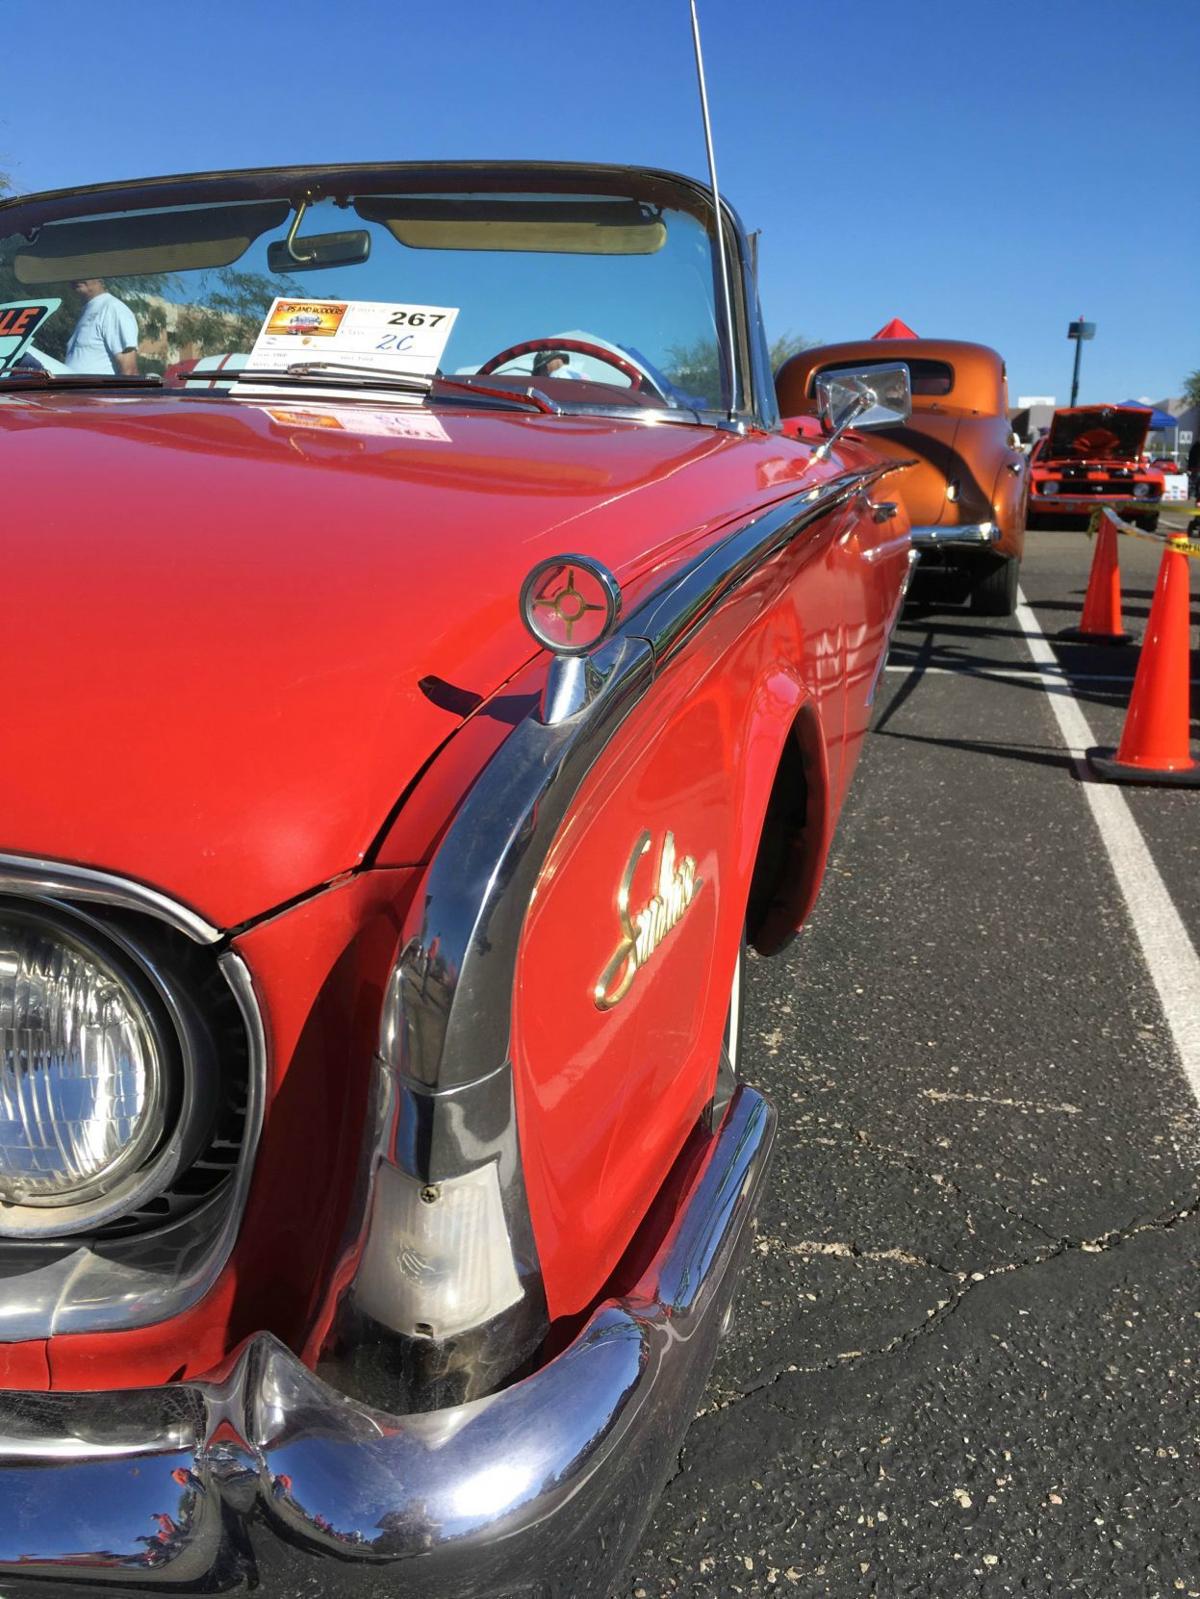 Cops & Rodders car show will have more than 800 vehicles on display